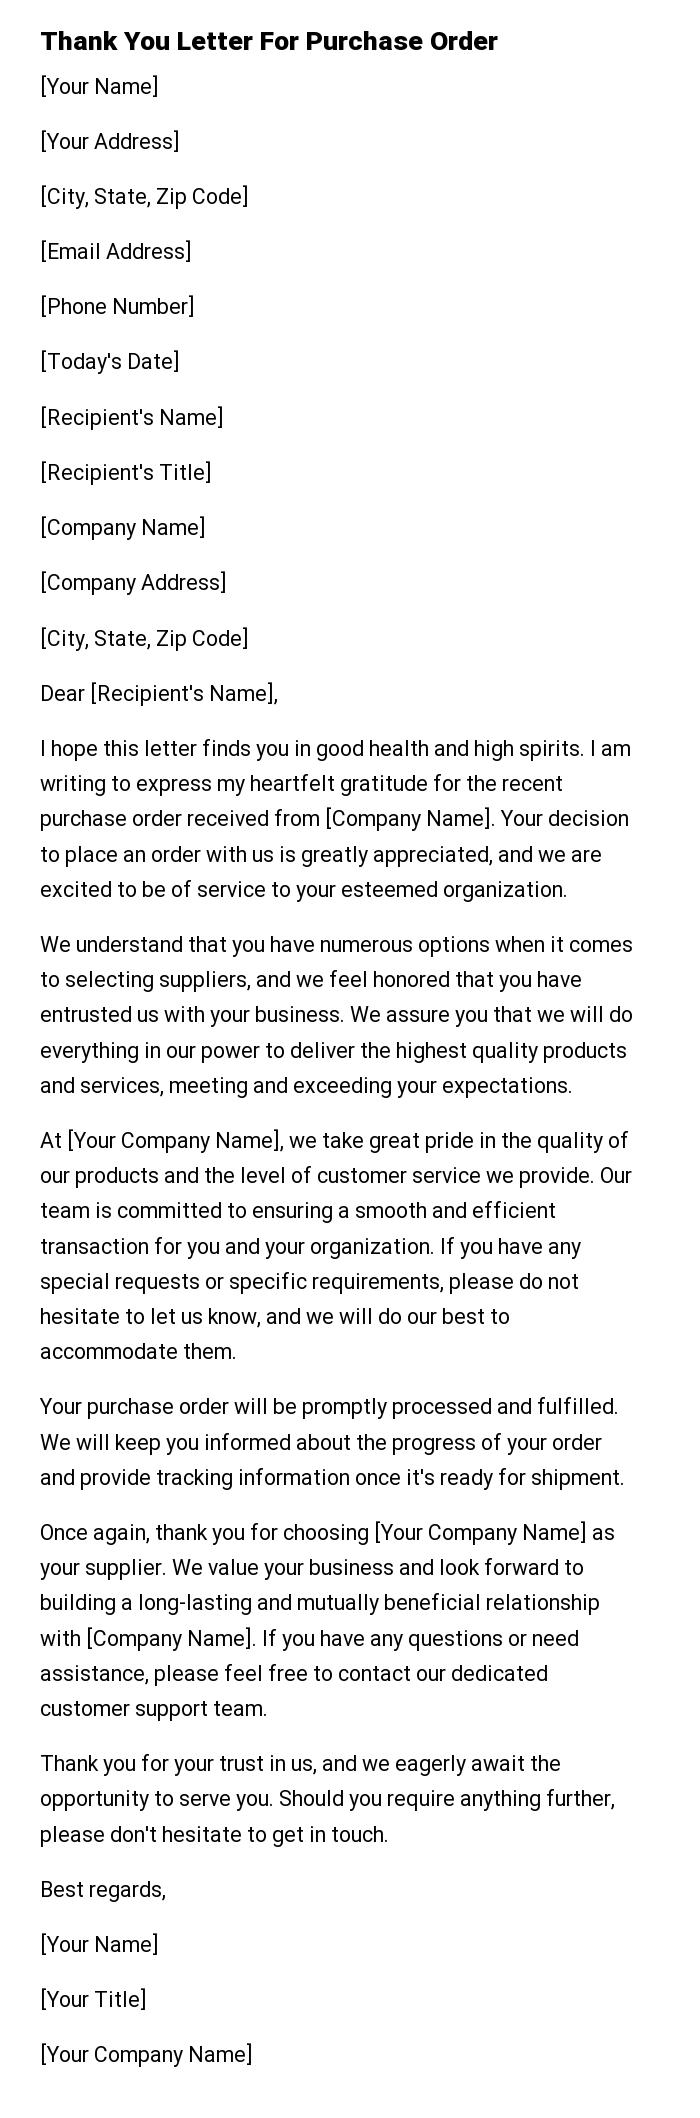 Thank You Letter For Purchase Order